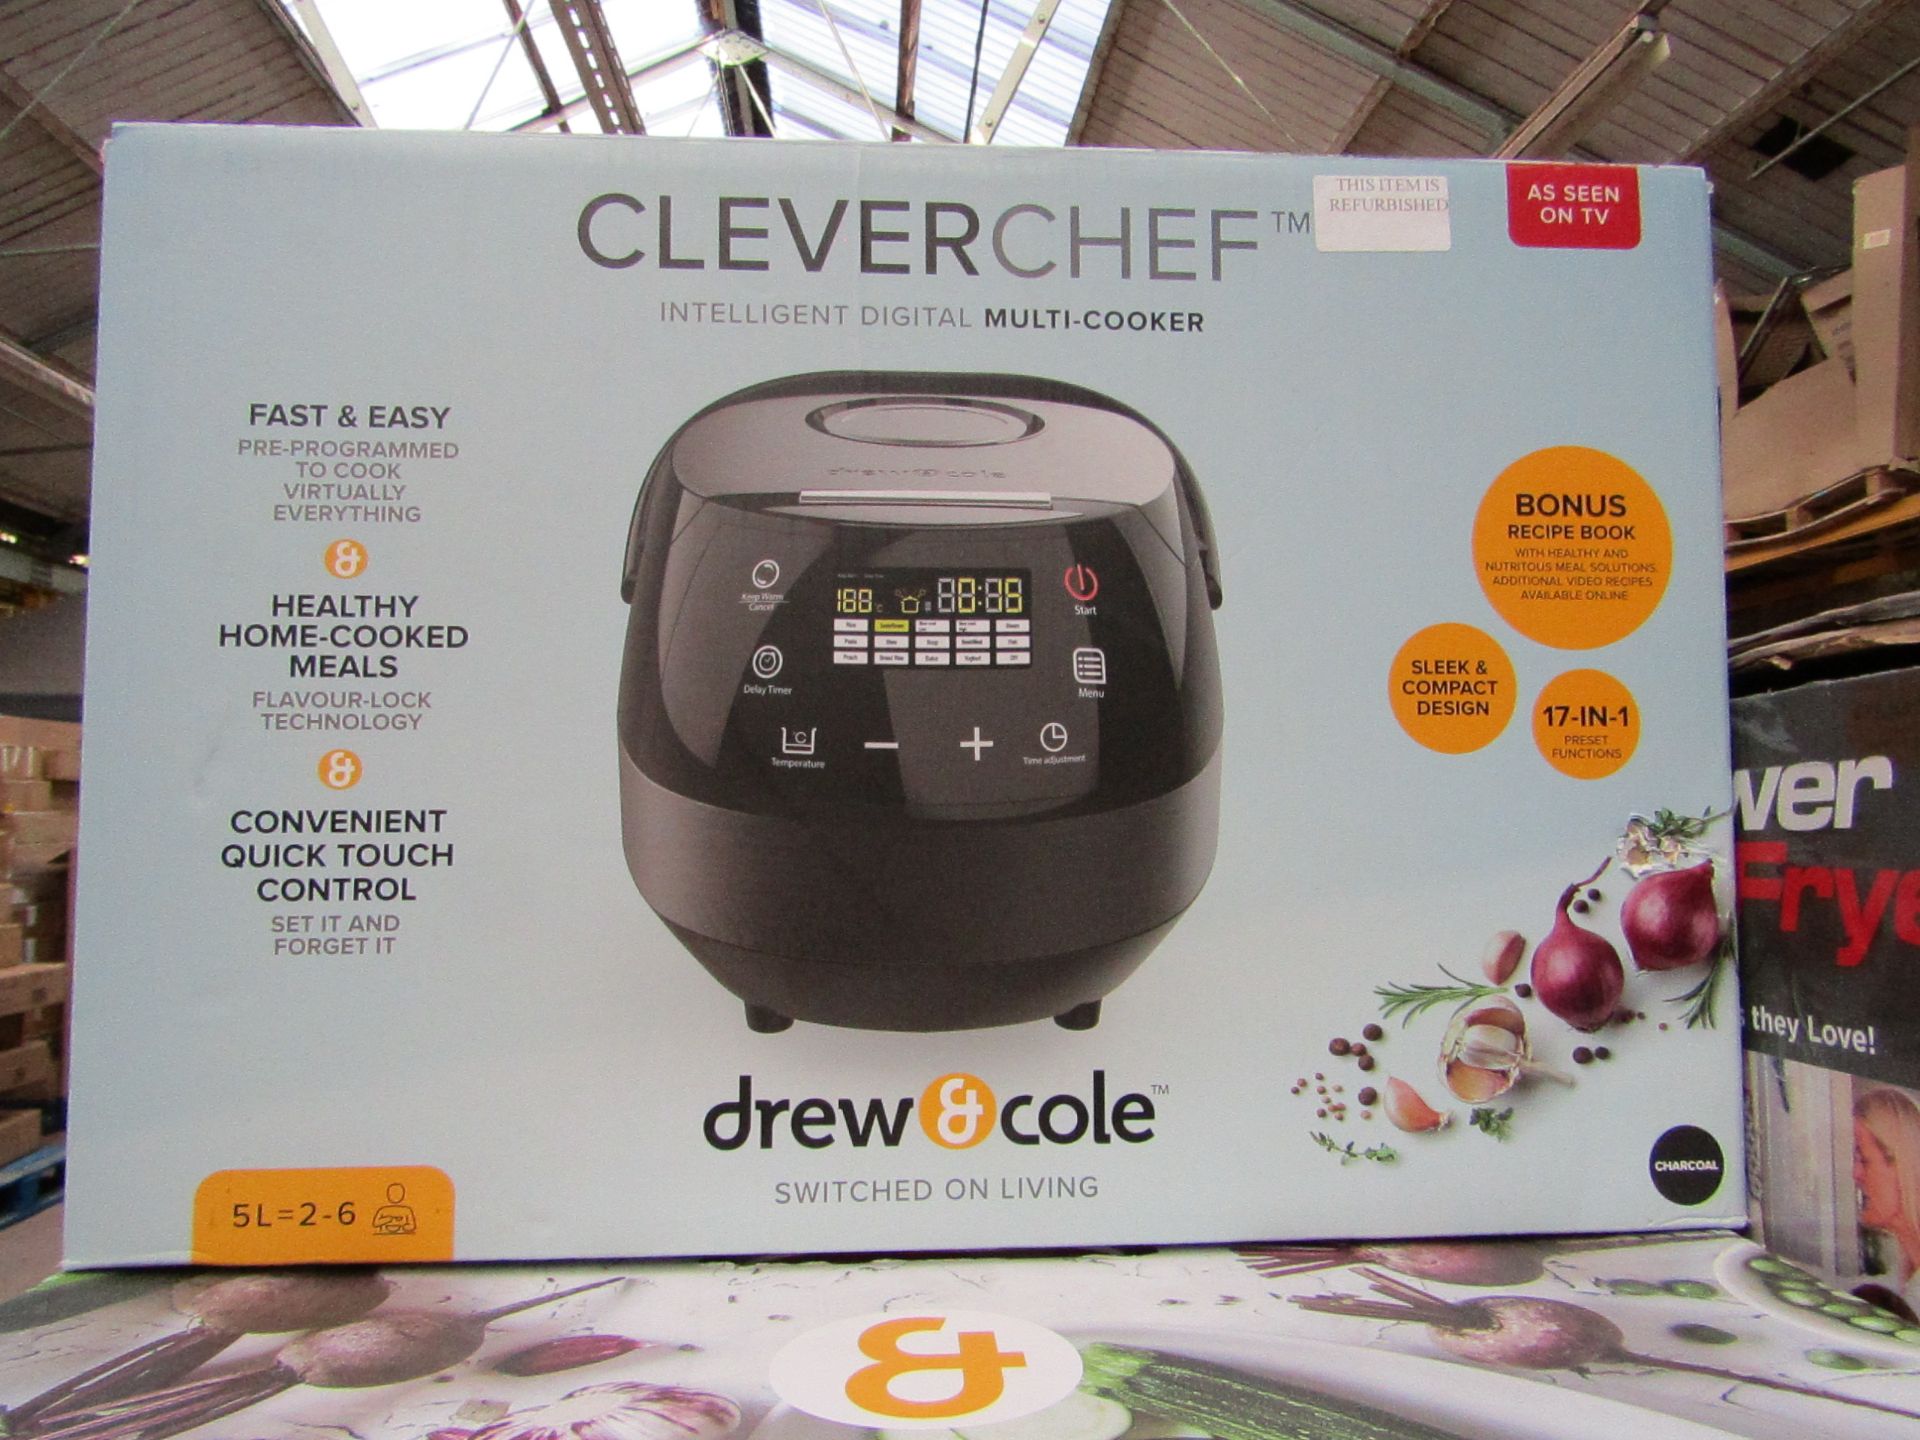 | 1x | DREW & COLE CLEVERCHEF | REFURBISHED AND BOXED | NO ONLINE RE-SALE | SKU C5060541511682 | RRP